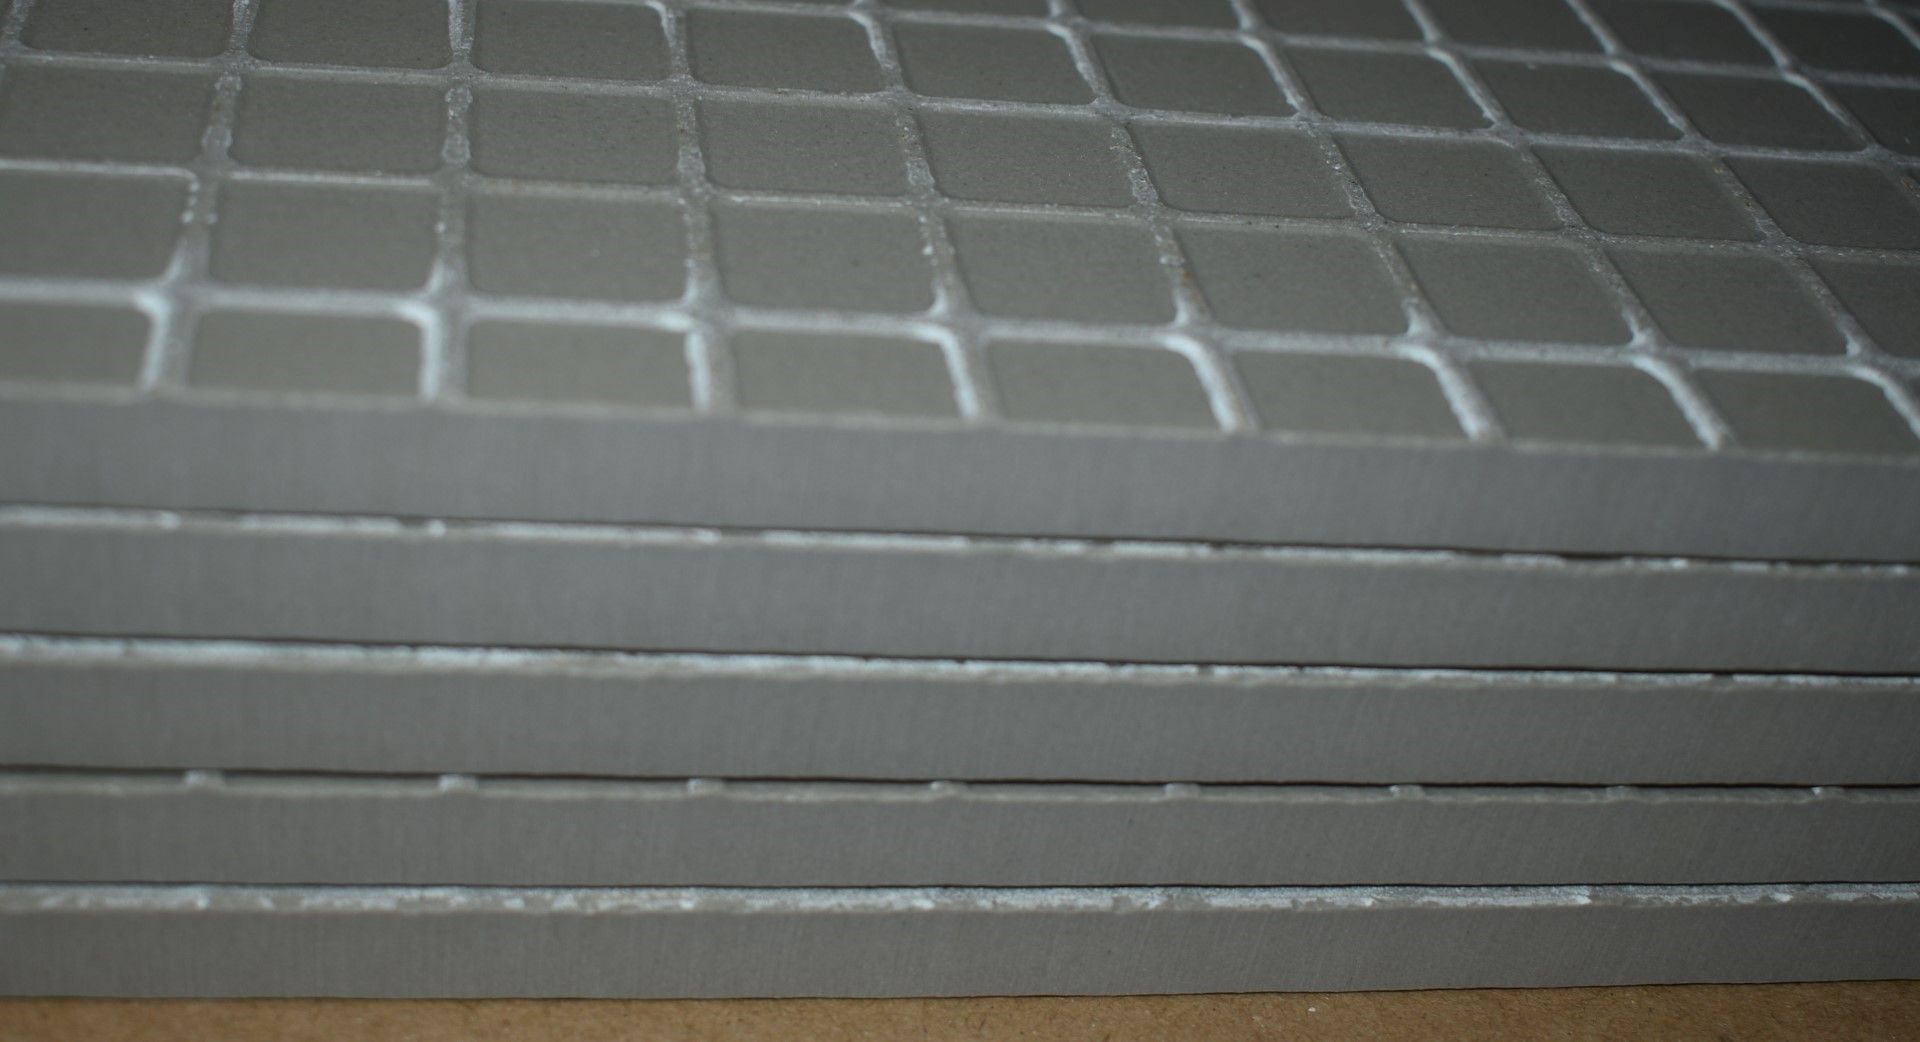 12 x Boxes of RAK Porcelain Floor or Wall Tiles - M Project Wood Design in Light Grey - 19.5 x 120 c - Image 4 of 7